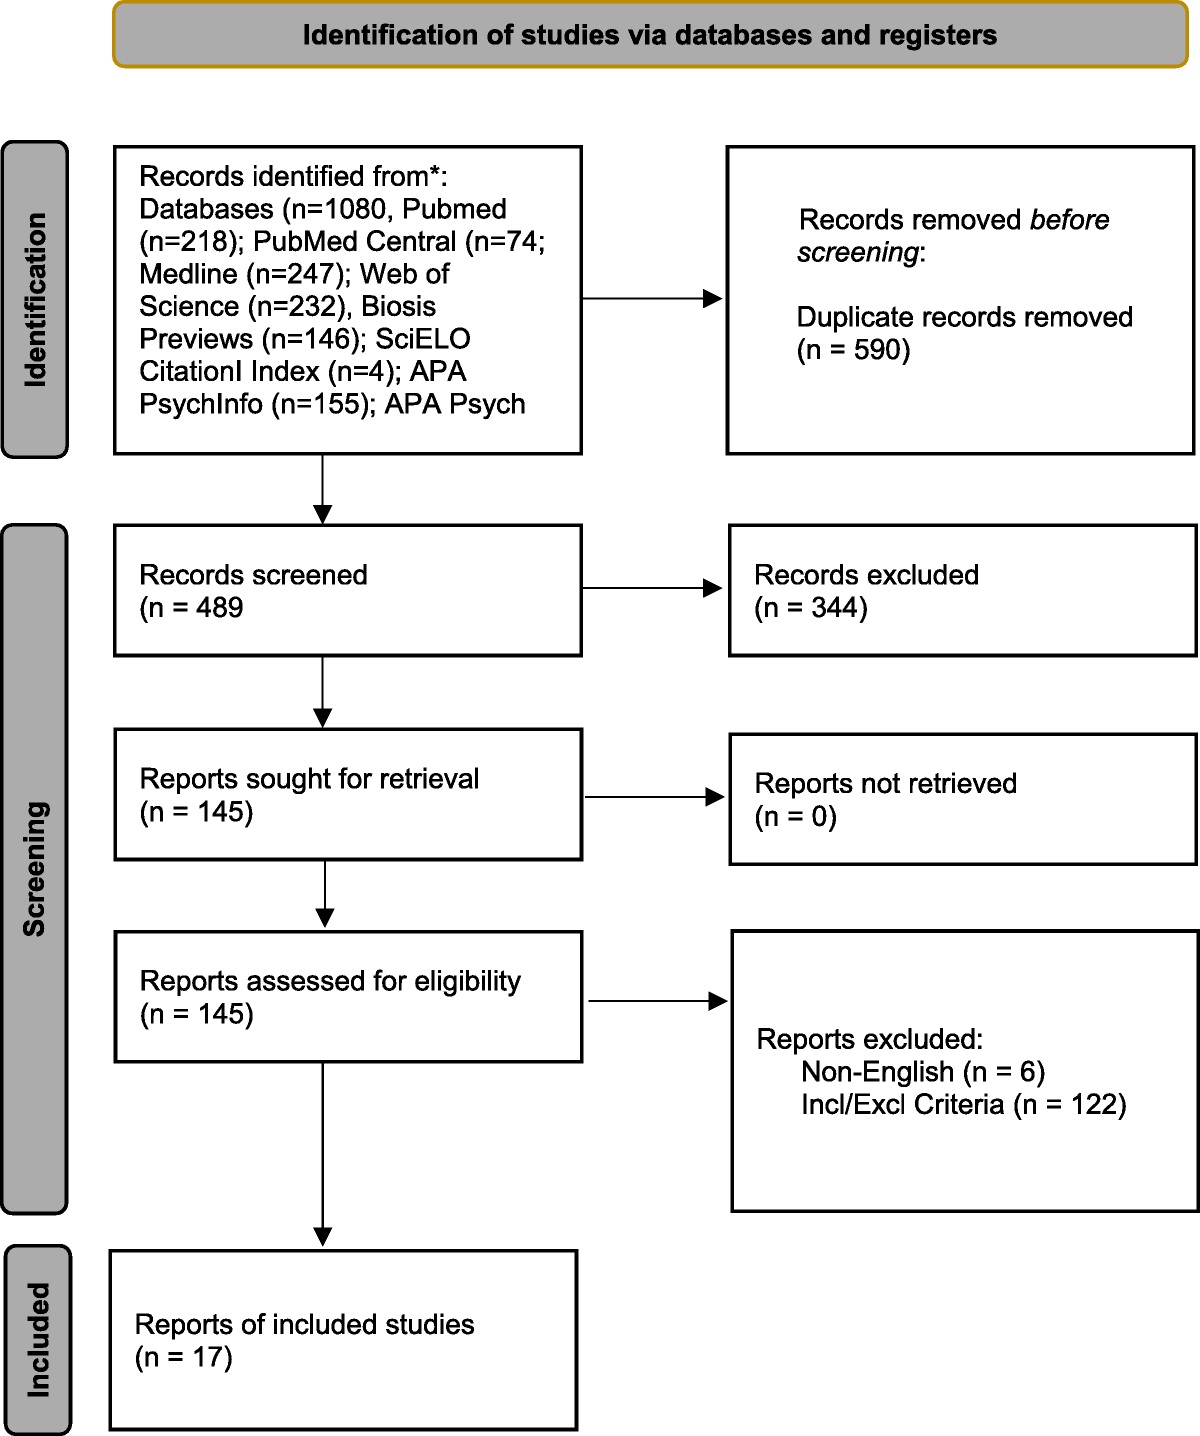 Clinical Presentations of Bupropion Prescription Drug Misuse: A Systematic Review